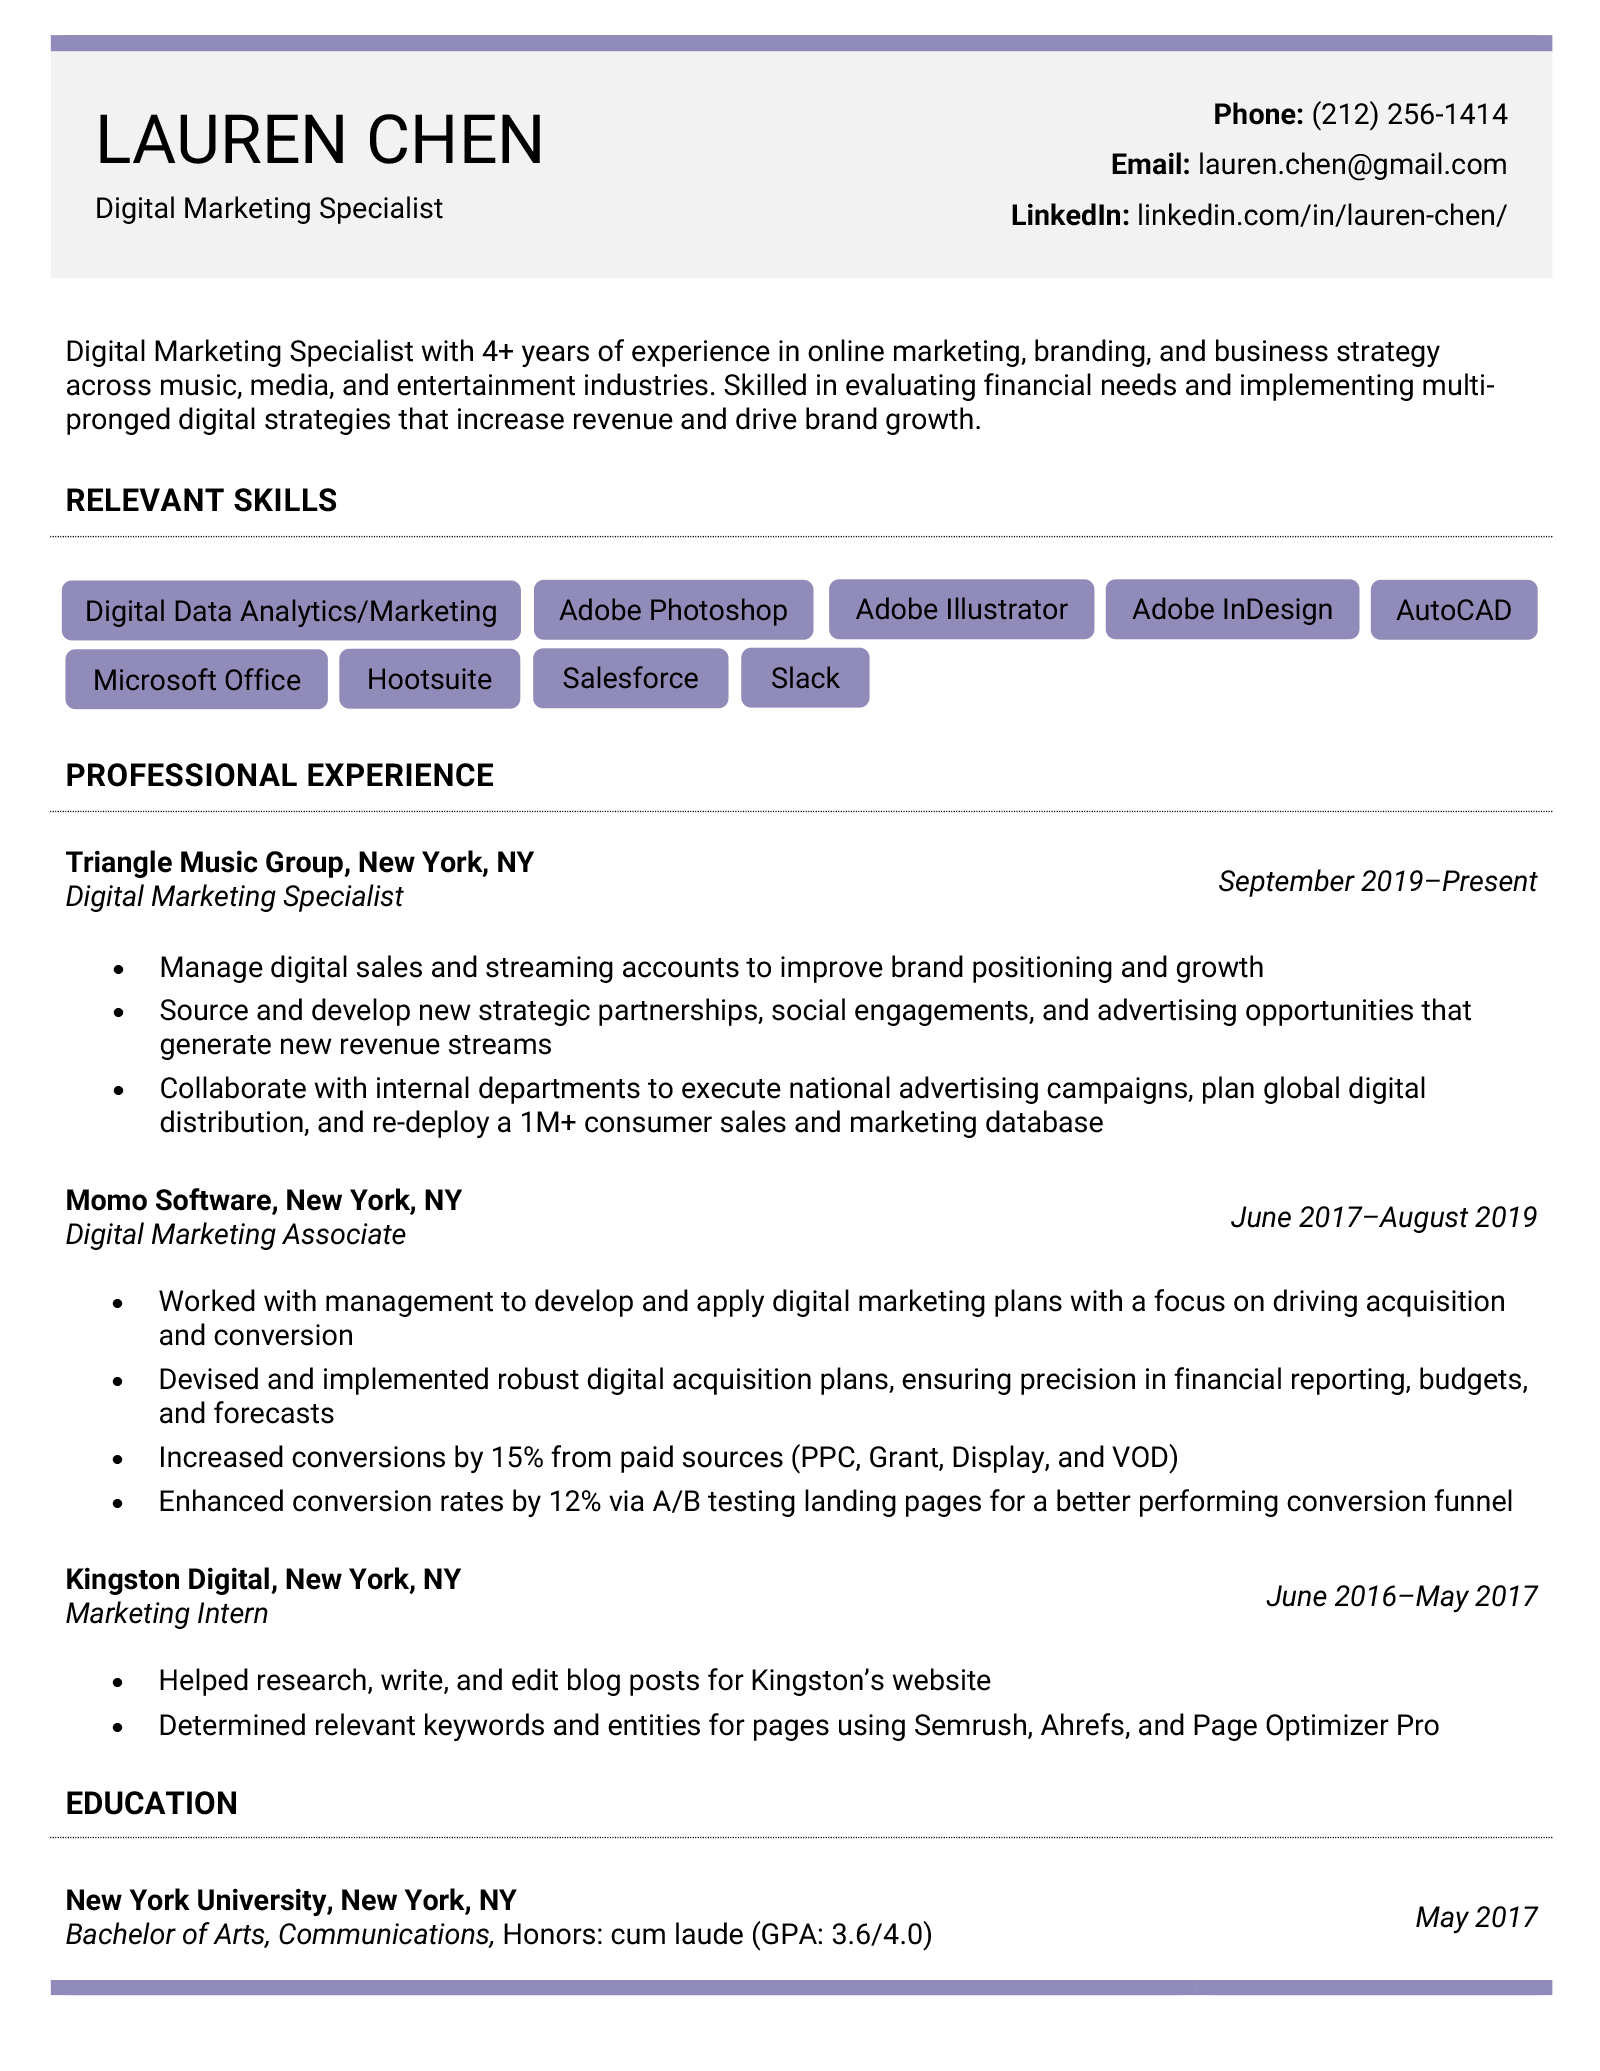 Is resume Making Me Rich?